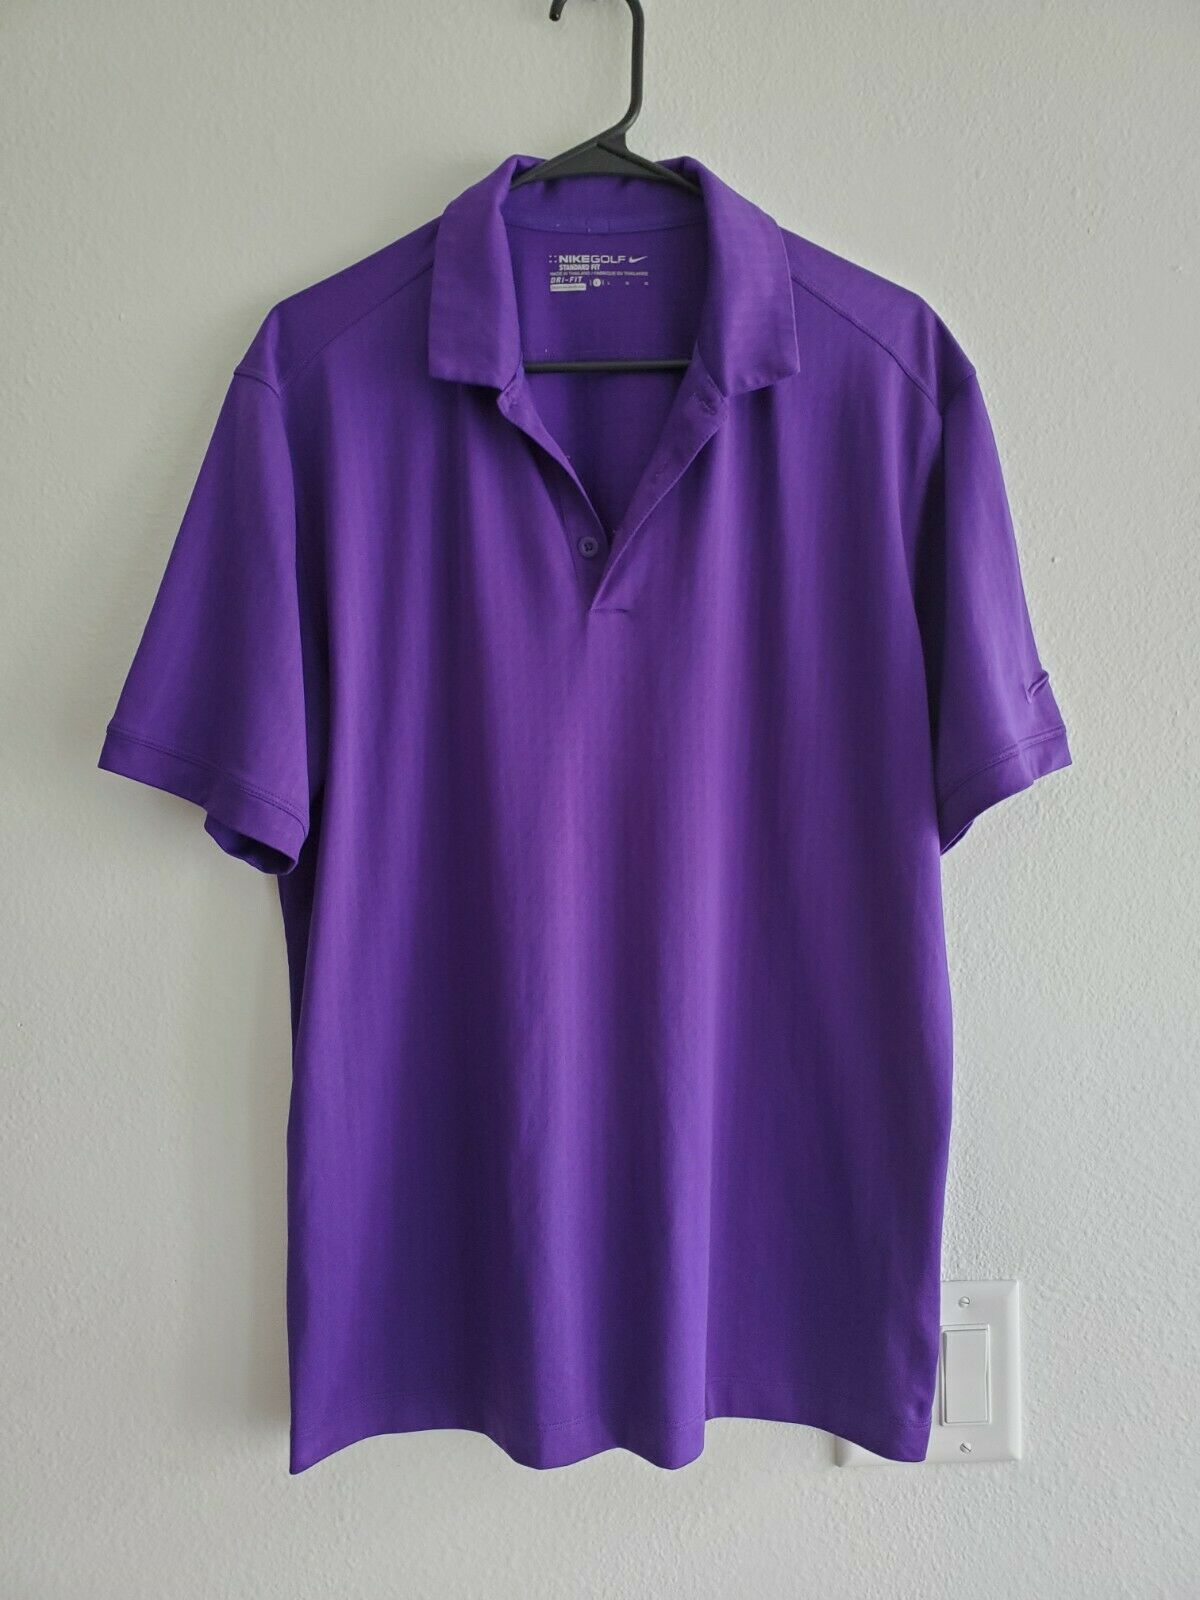 Nike Golf Dri Fit Standard Fit Polo Shirt Purple Mens Large Preowned